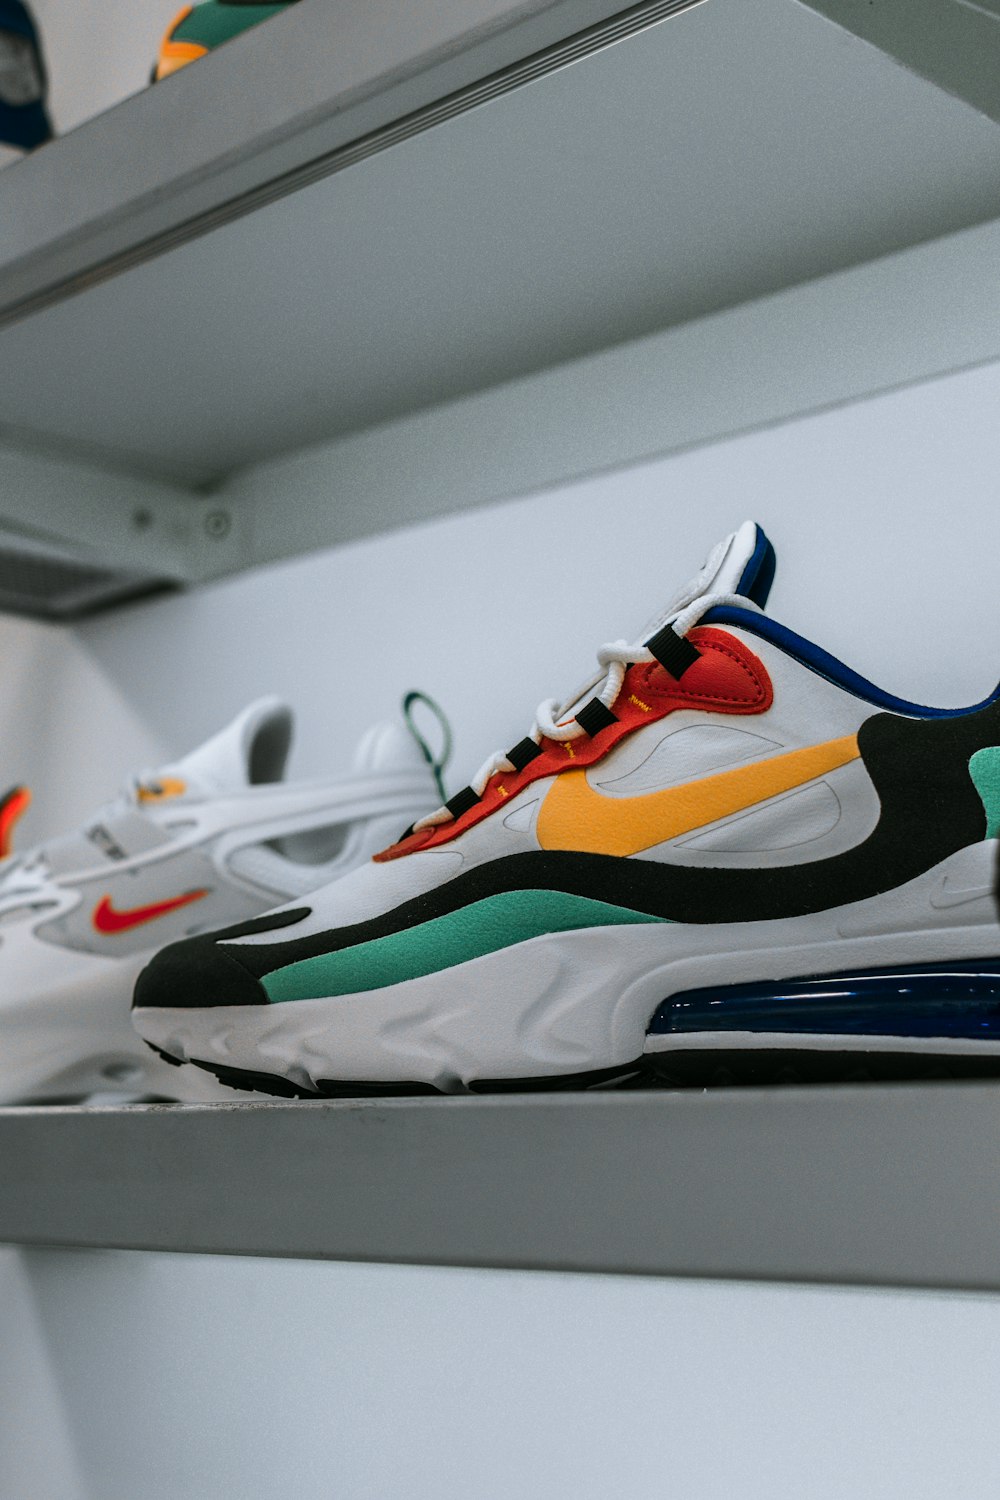 white and multicolored Nike Air Max shoe on shelf